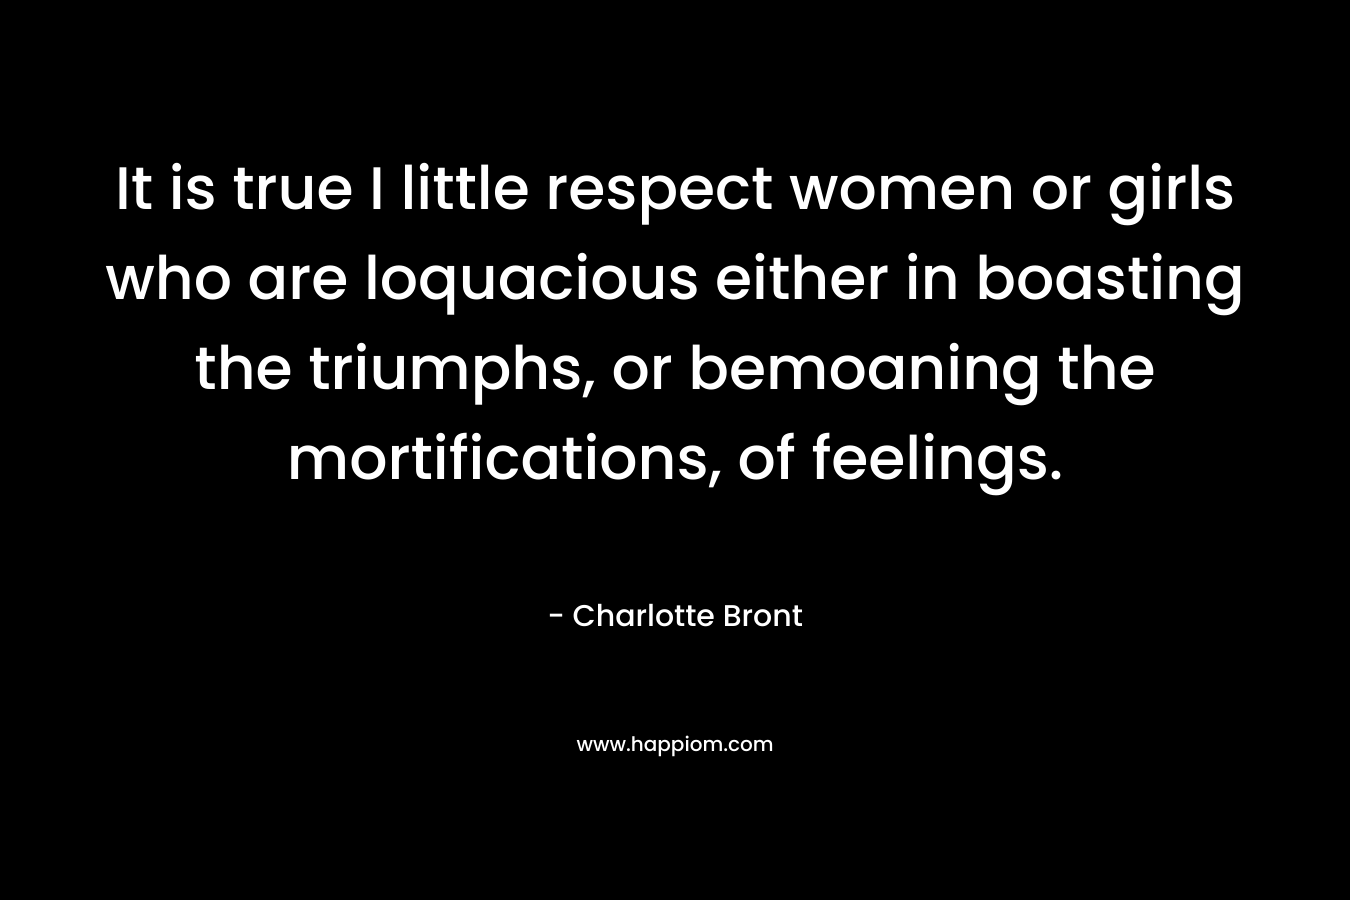 It is true I little respect women or girls who are loquacious either in boasting the triumphs, or bemoaning the mortifications, of feelings. – Charlotte Bront